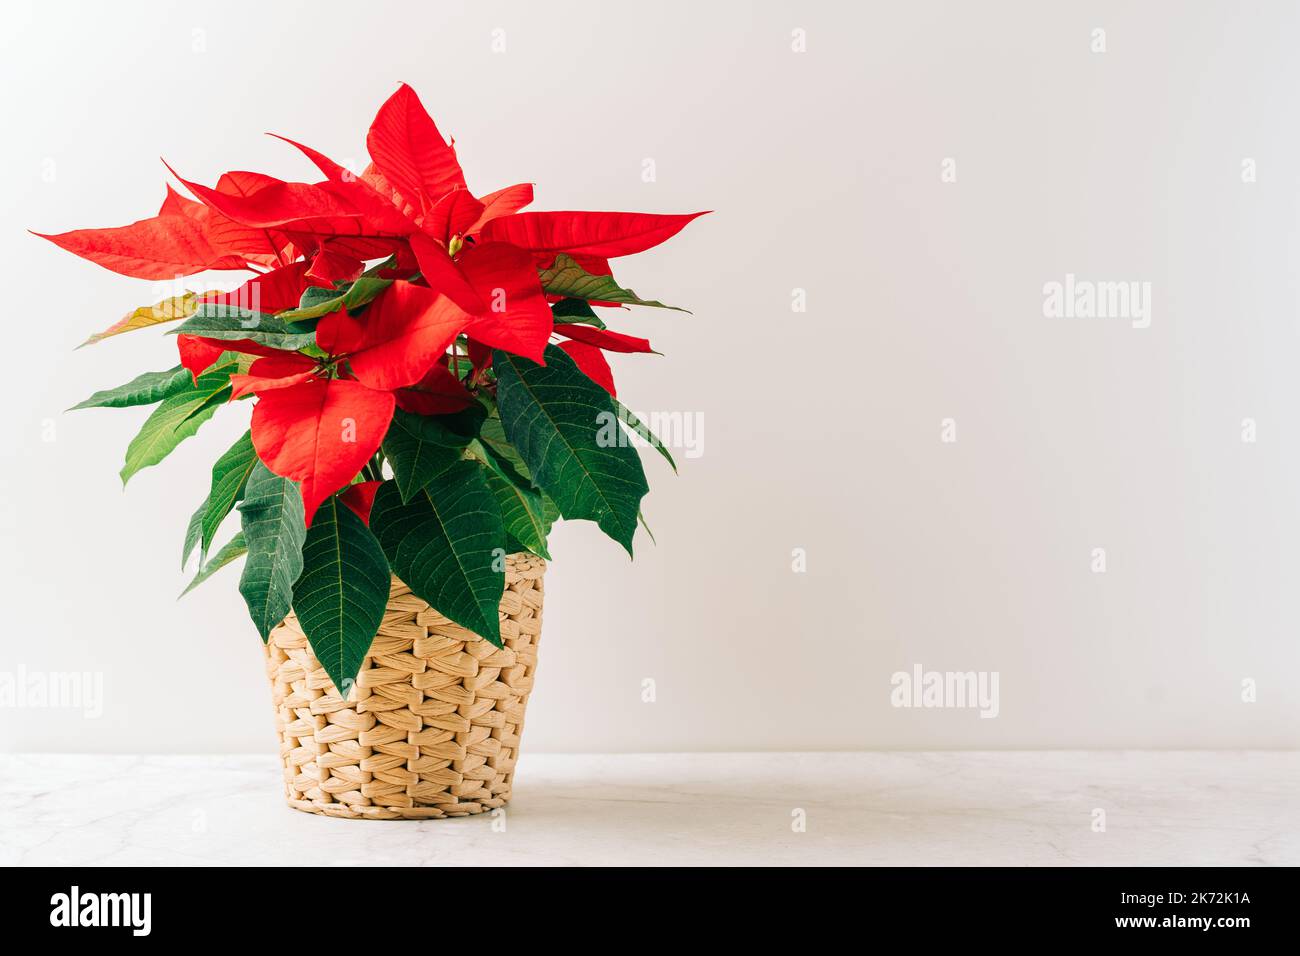 Natural miniature Christmas flower poinsettia in pot on white table with natural decor and white background. Xmas greeting card with copy space and Stock Photo